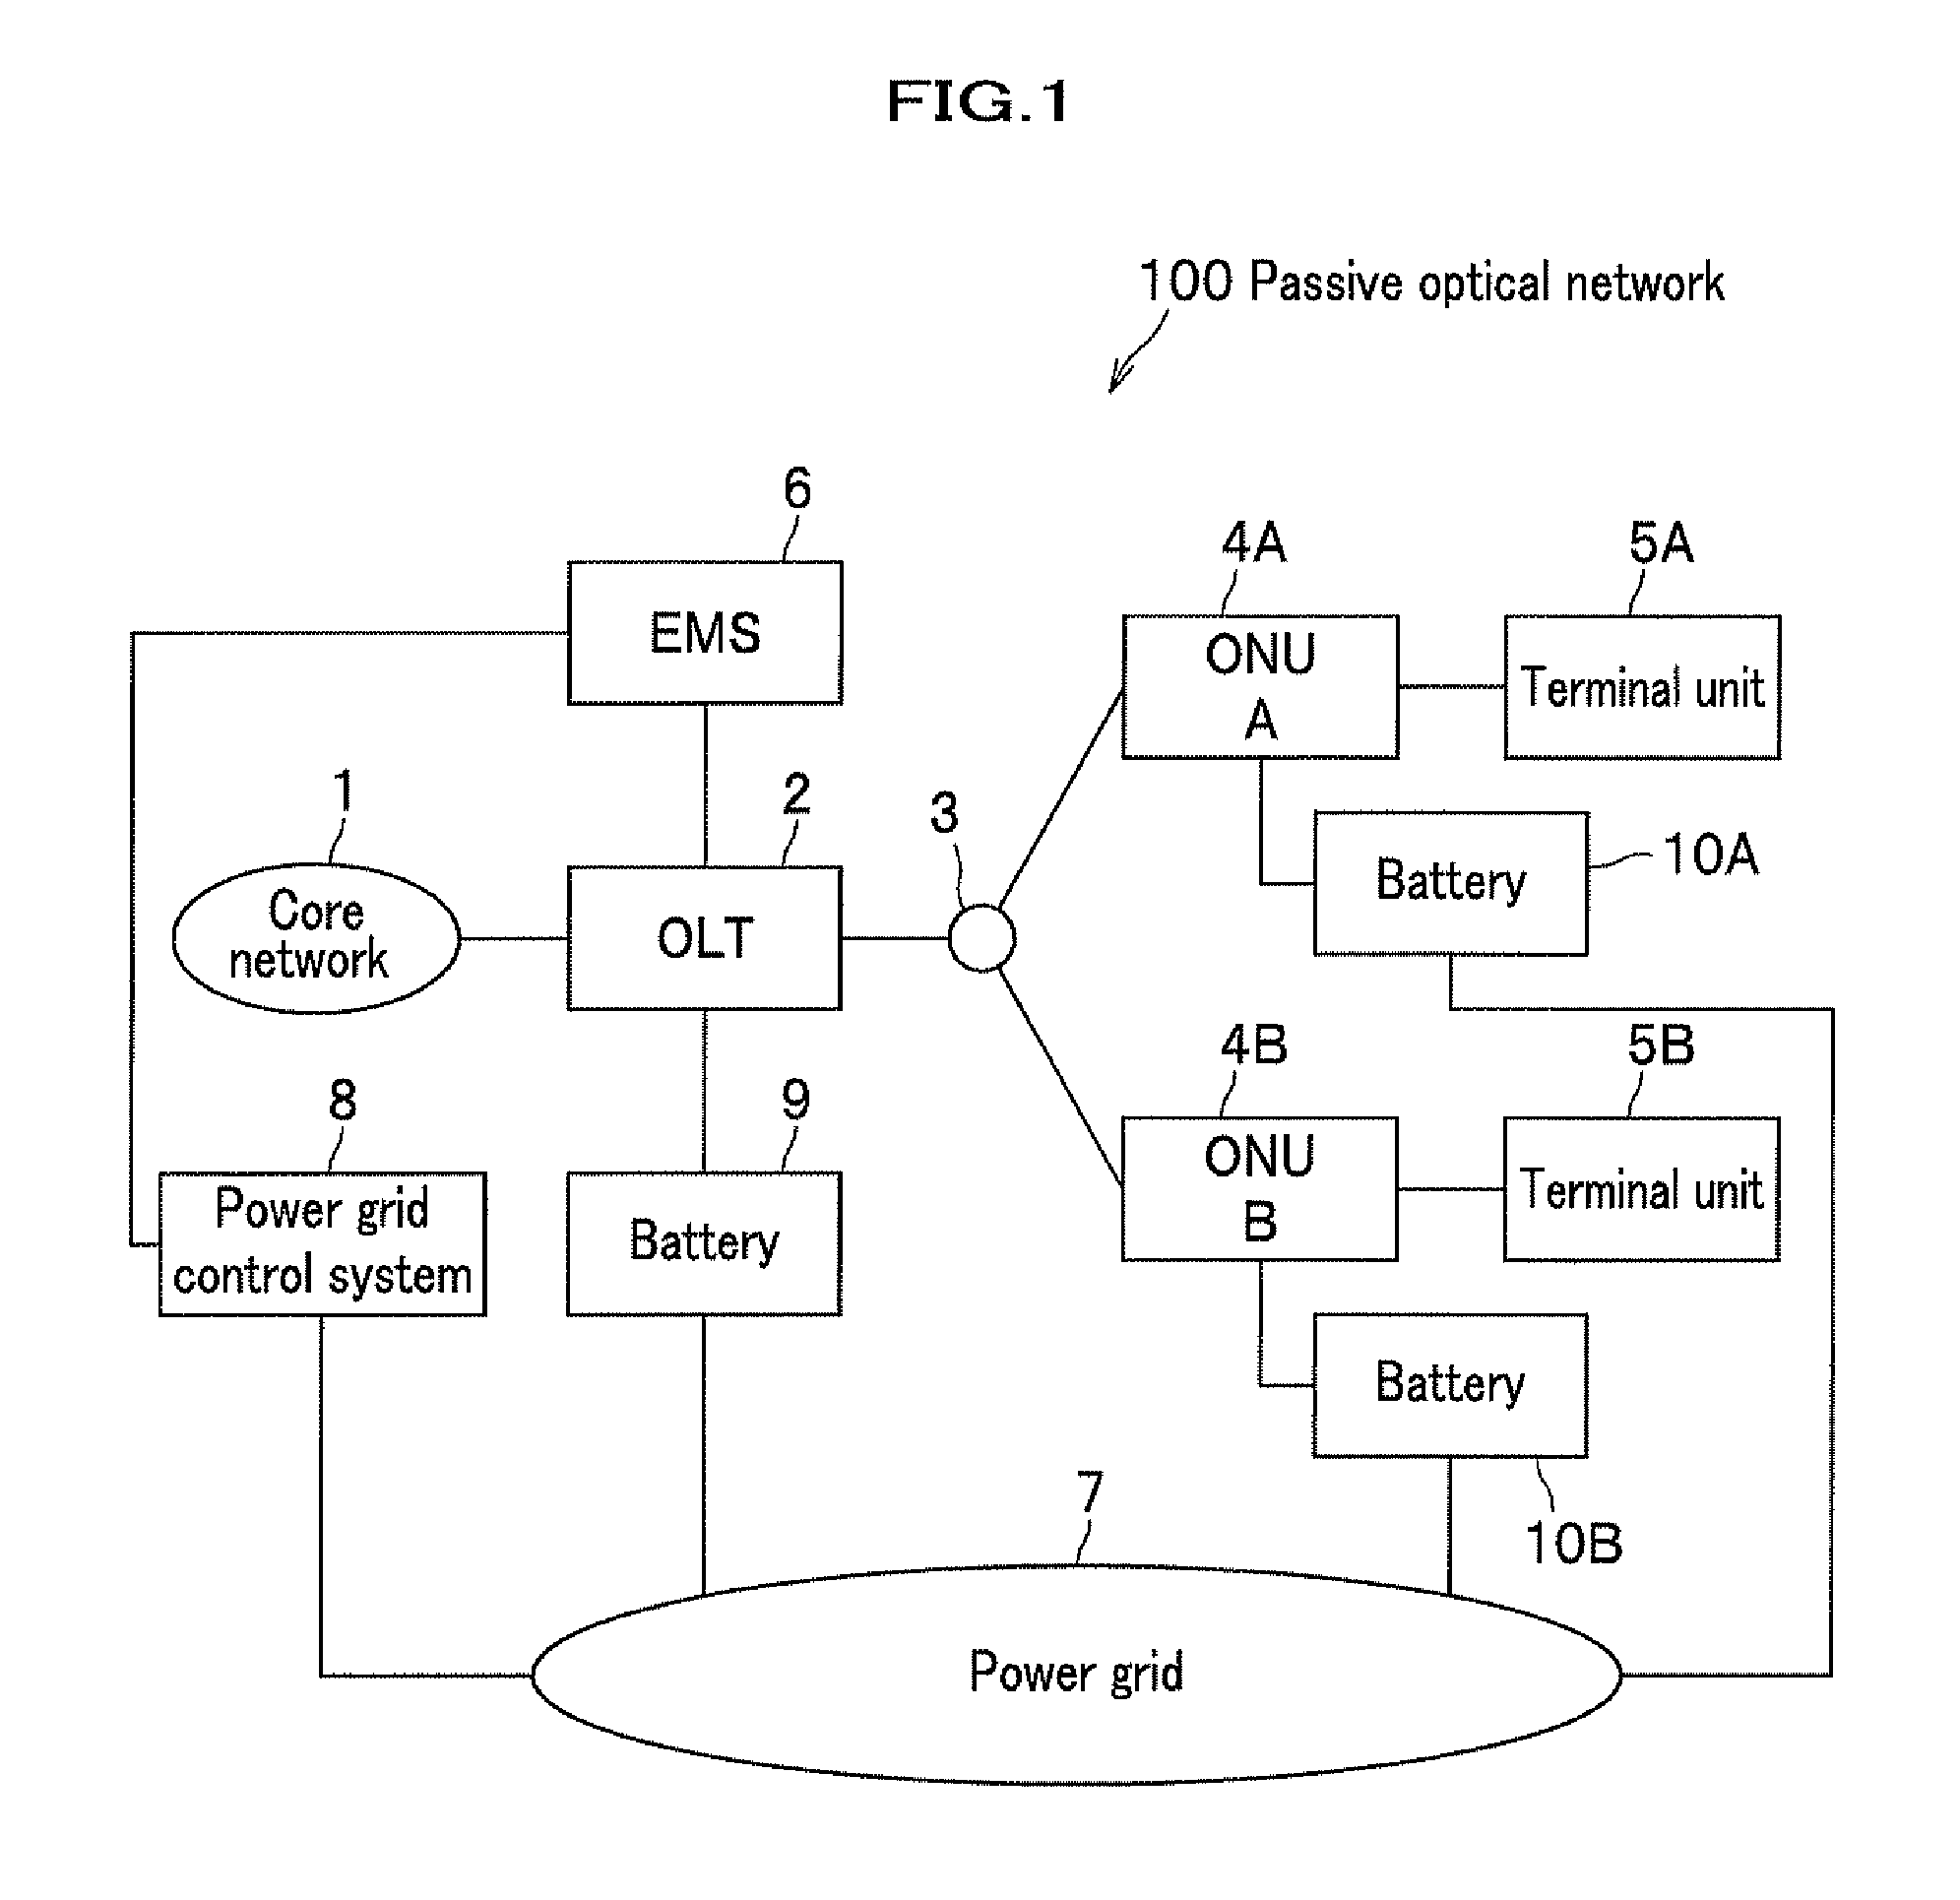 Passive optical network system, optical line terminal, and optical network unit